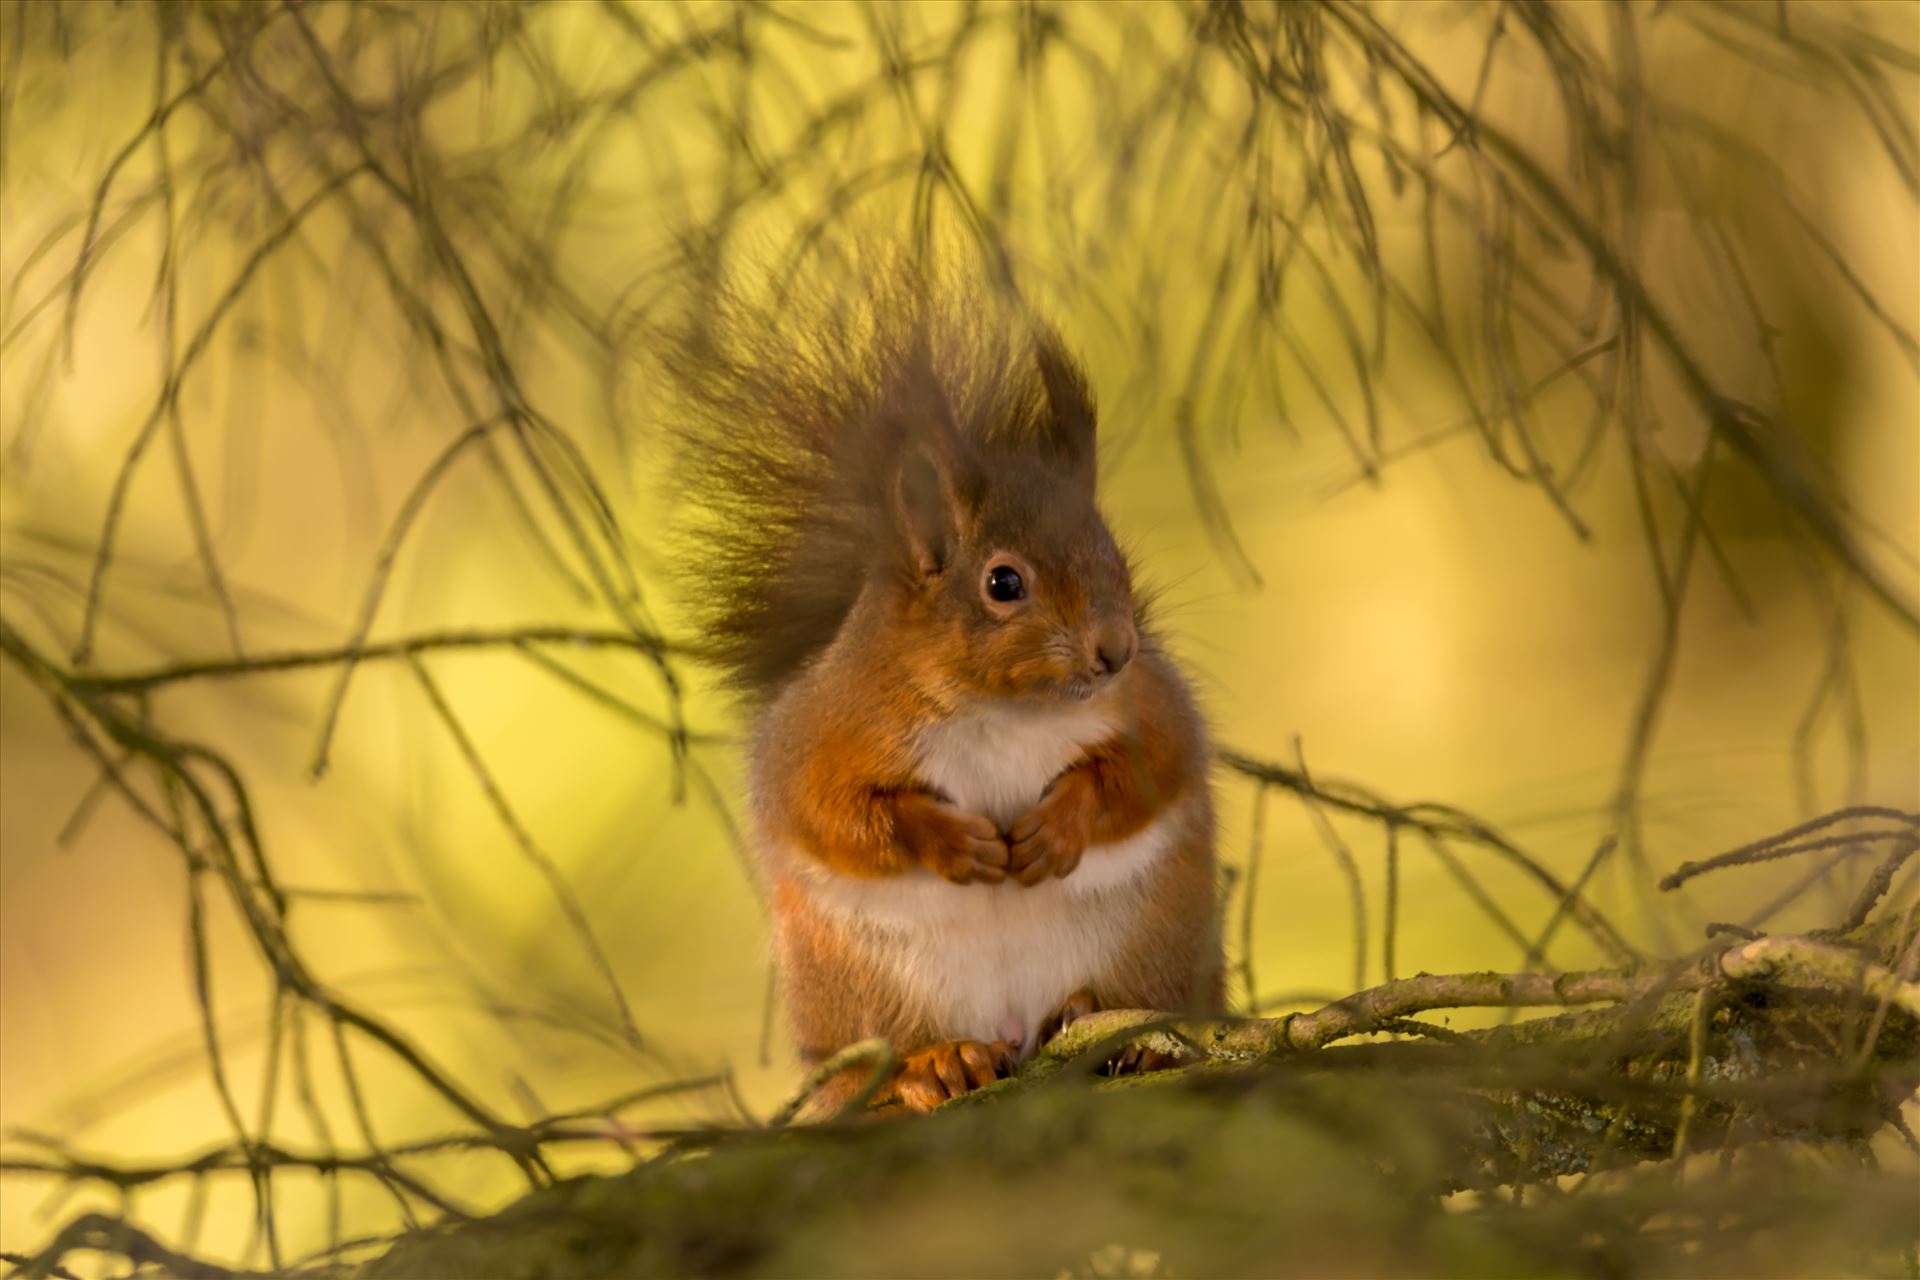 Red squirrel in the wild The red squirrel is native to Britain, but its future is increasingly uncertain as the introduced American grey squirrel expands its range across the mainland. There are estimated to be only 140,000 red squirrels left in Britain, with over 2.5M greys. by philreay